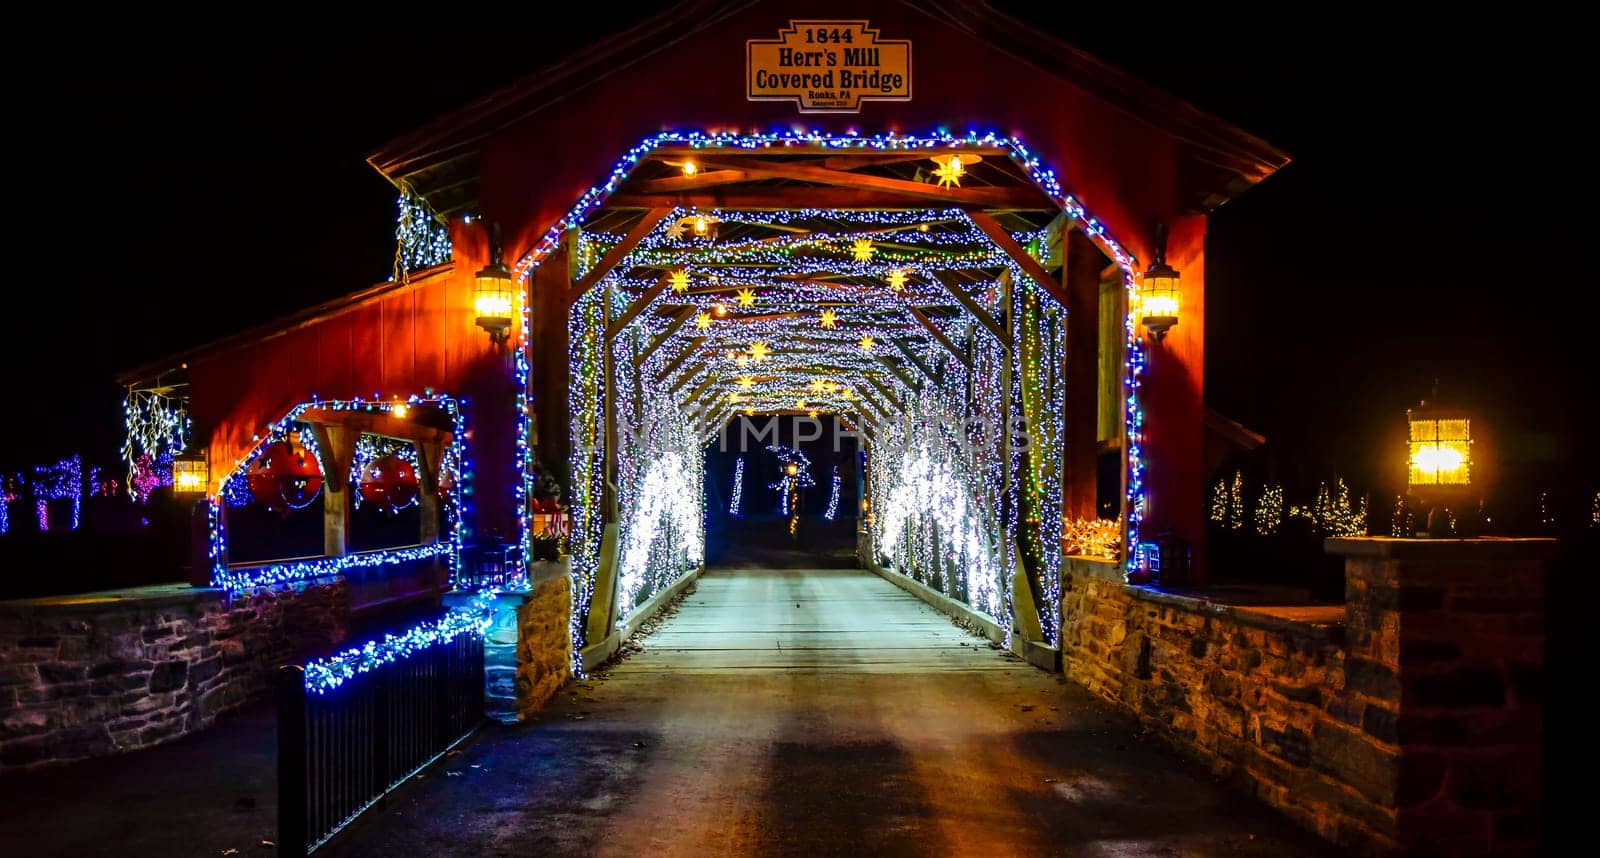 Elizabethtown, Pennsylvania, USA, December 8,2023 - Twinkling Blue And White Lights Line The Interior Of Herr's Mill Covered Bridge From 1844, Creating A Festive Tunnel Effect At Night,